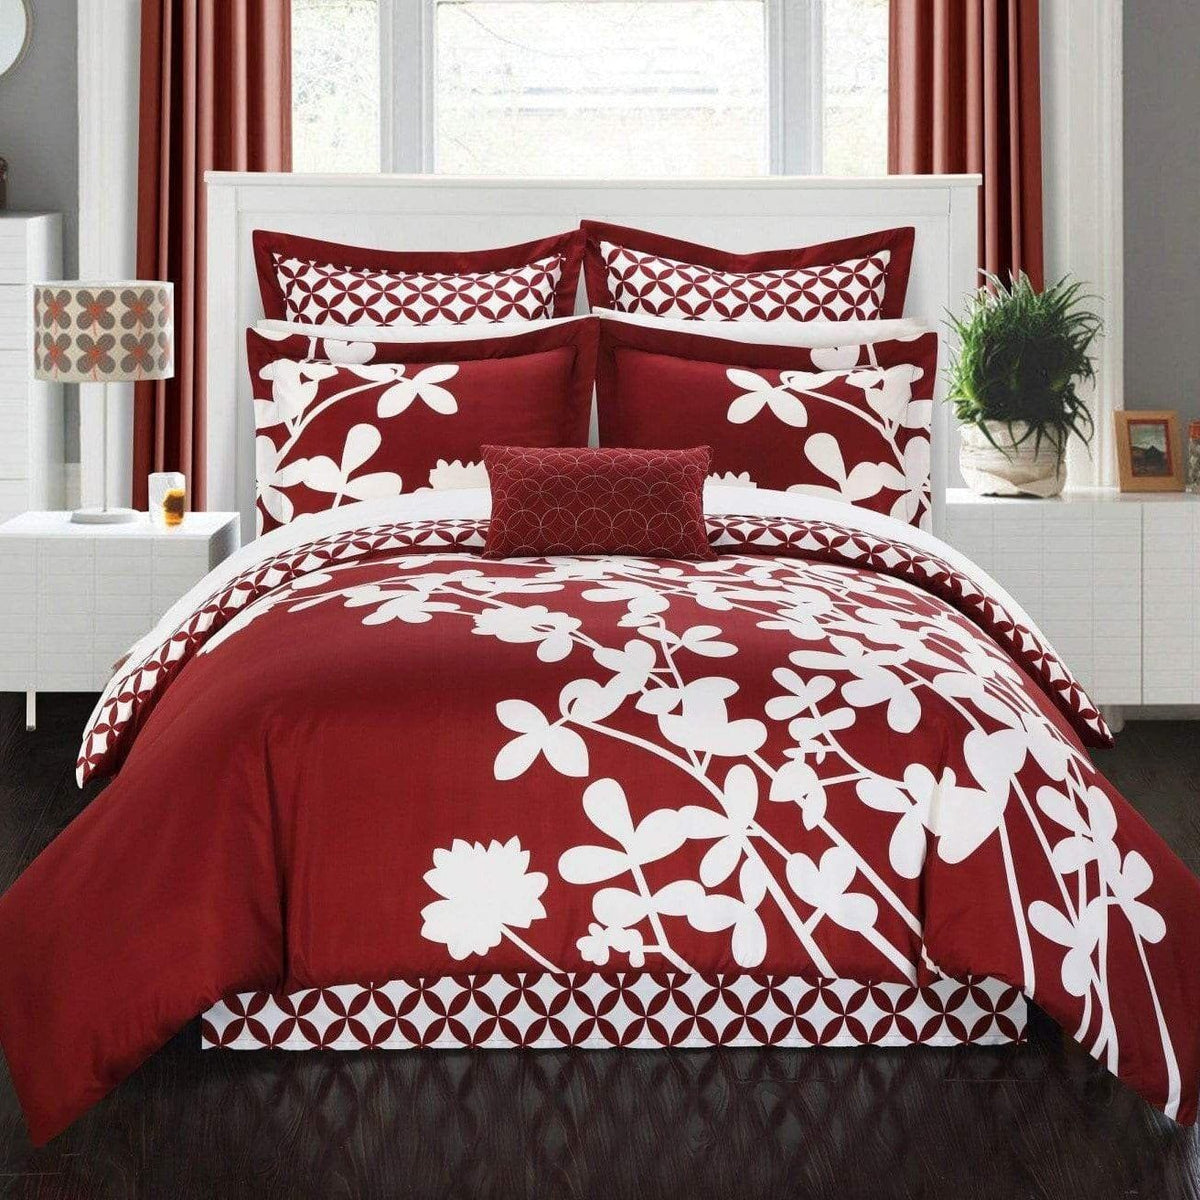 Chic Home Iris 11 Piece Floral Comforter Set Red